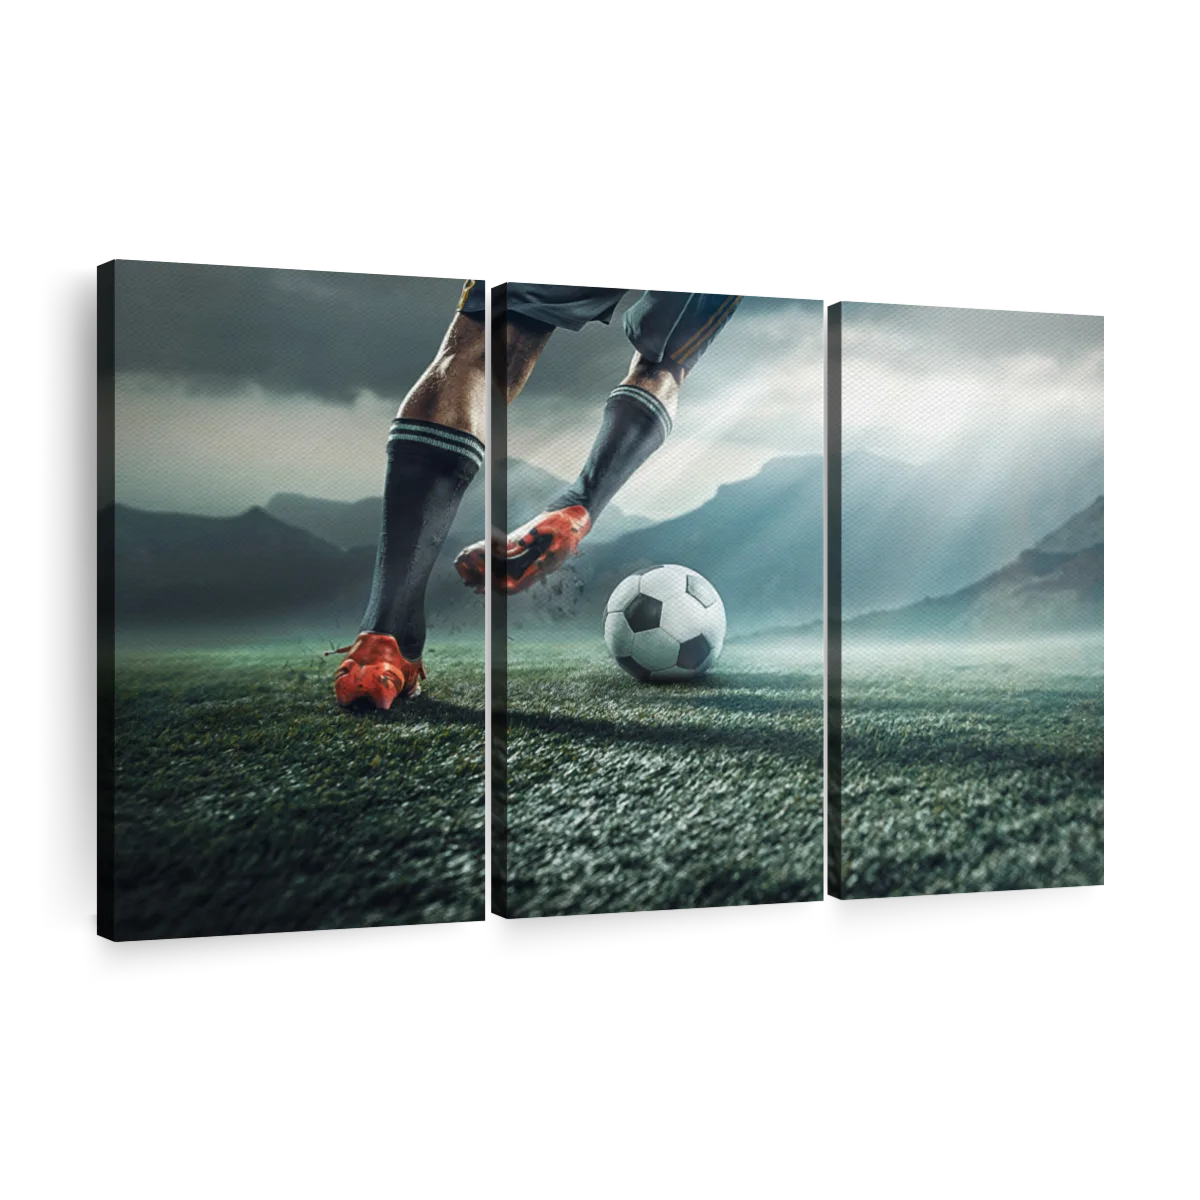 Horizontal image of soccer ball being kicked by footballer against